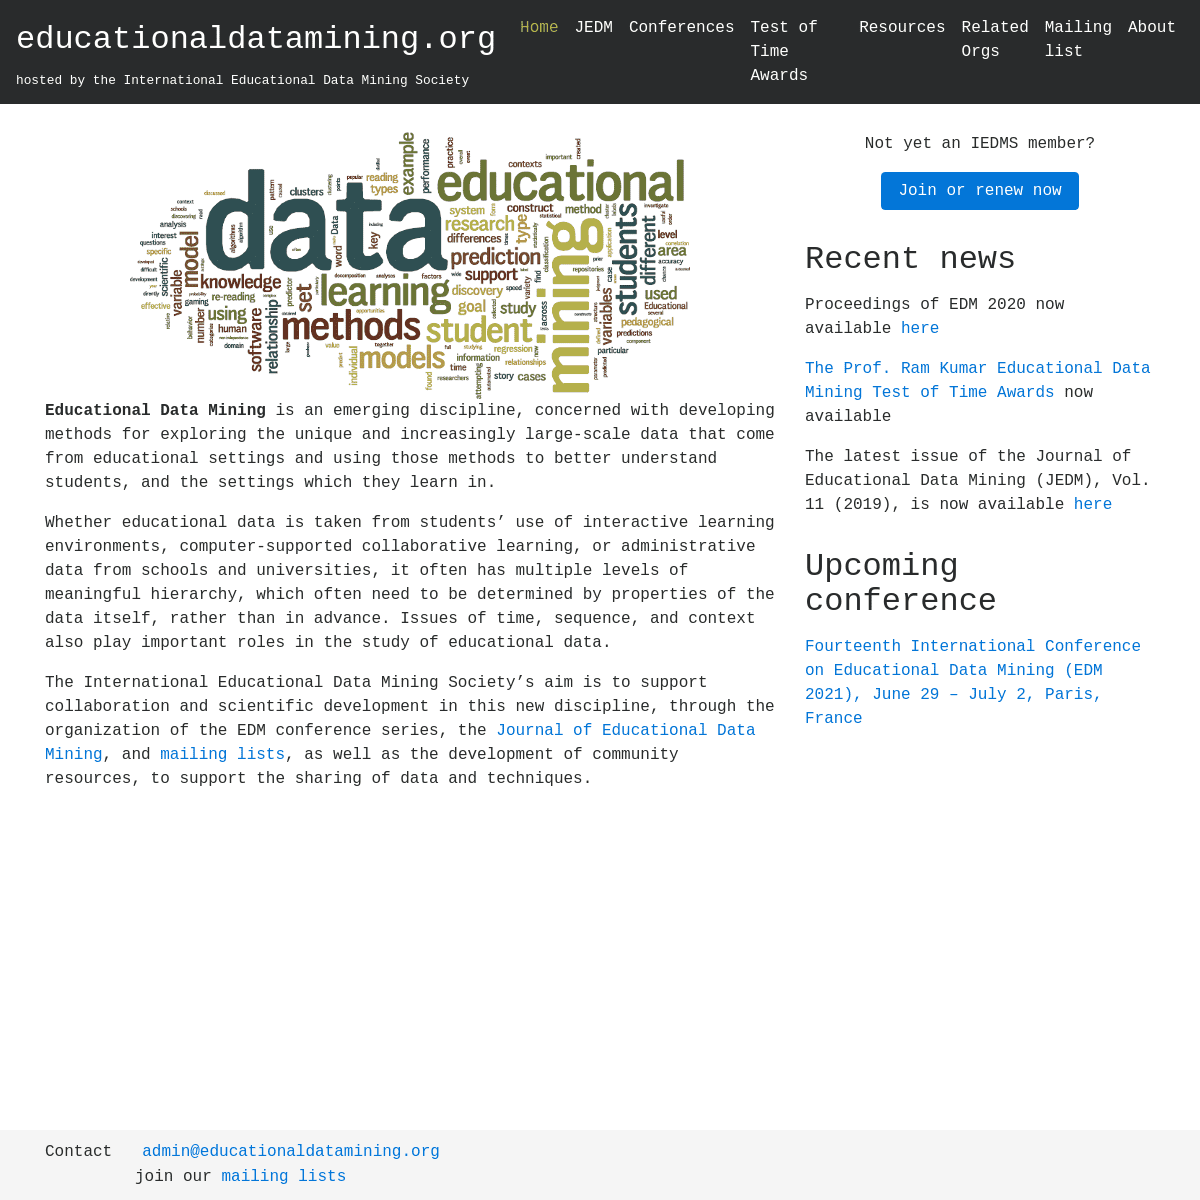 A complete backup of https://educationaldatamining.org